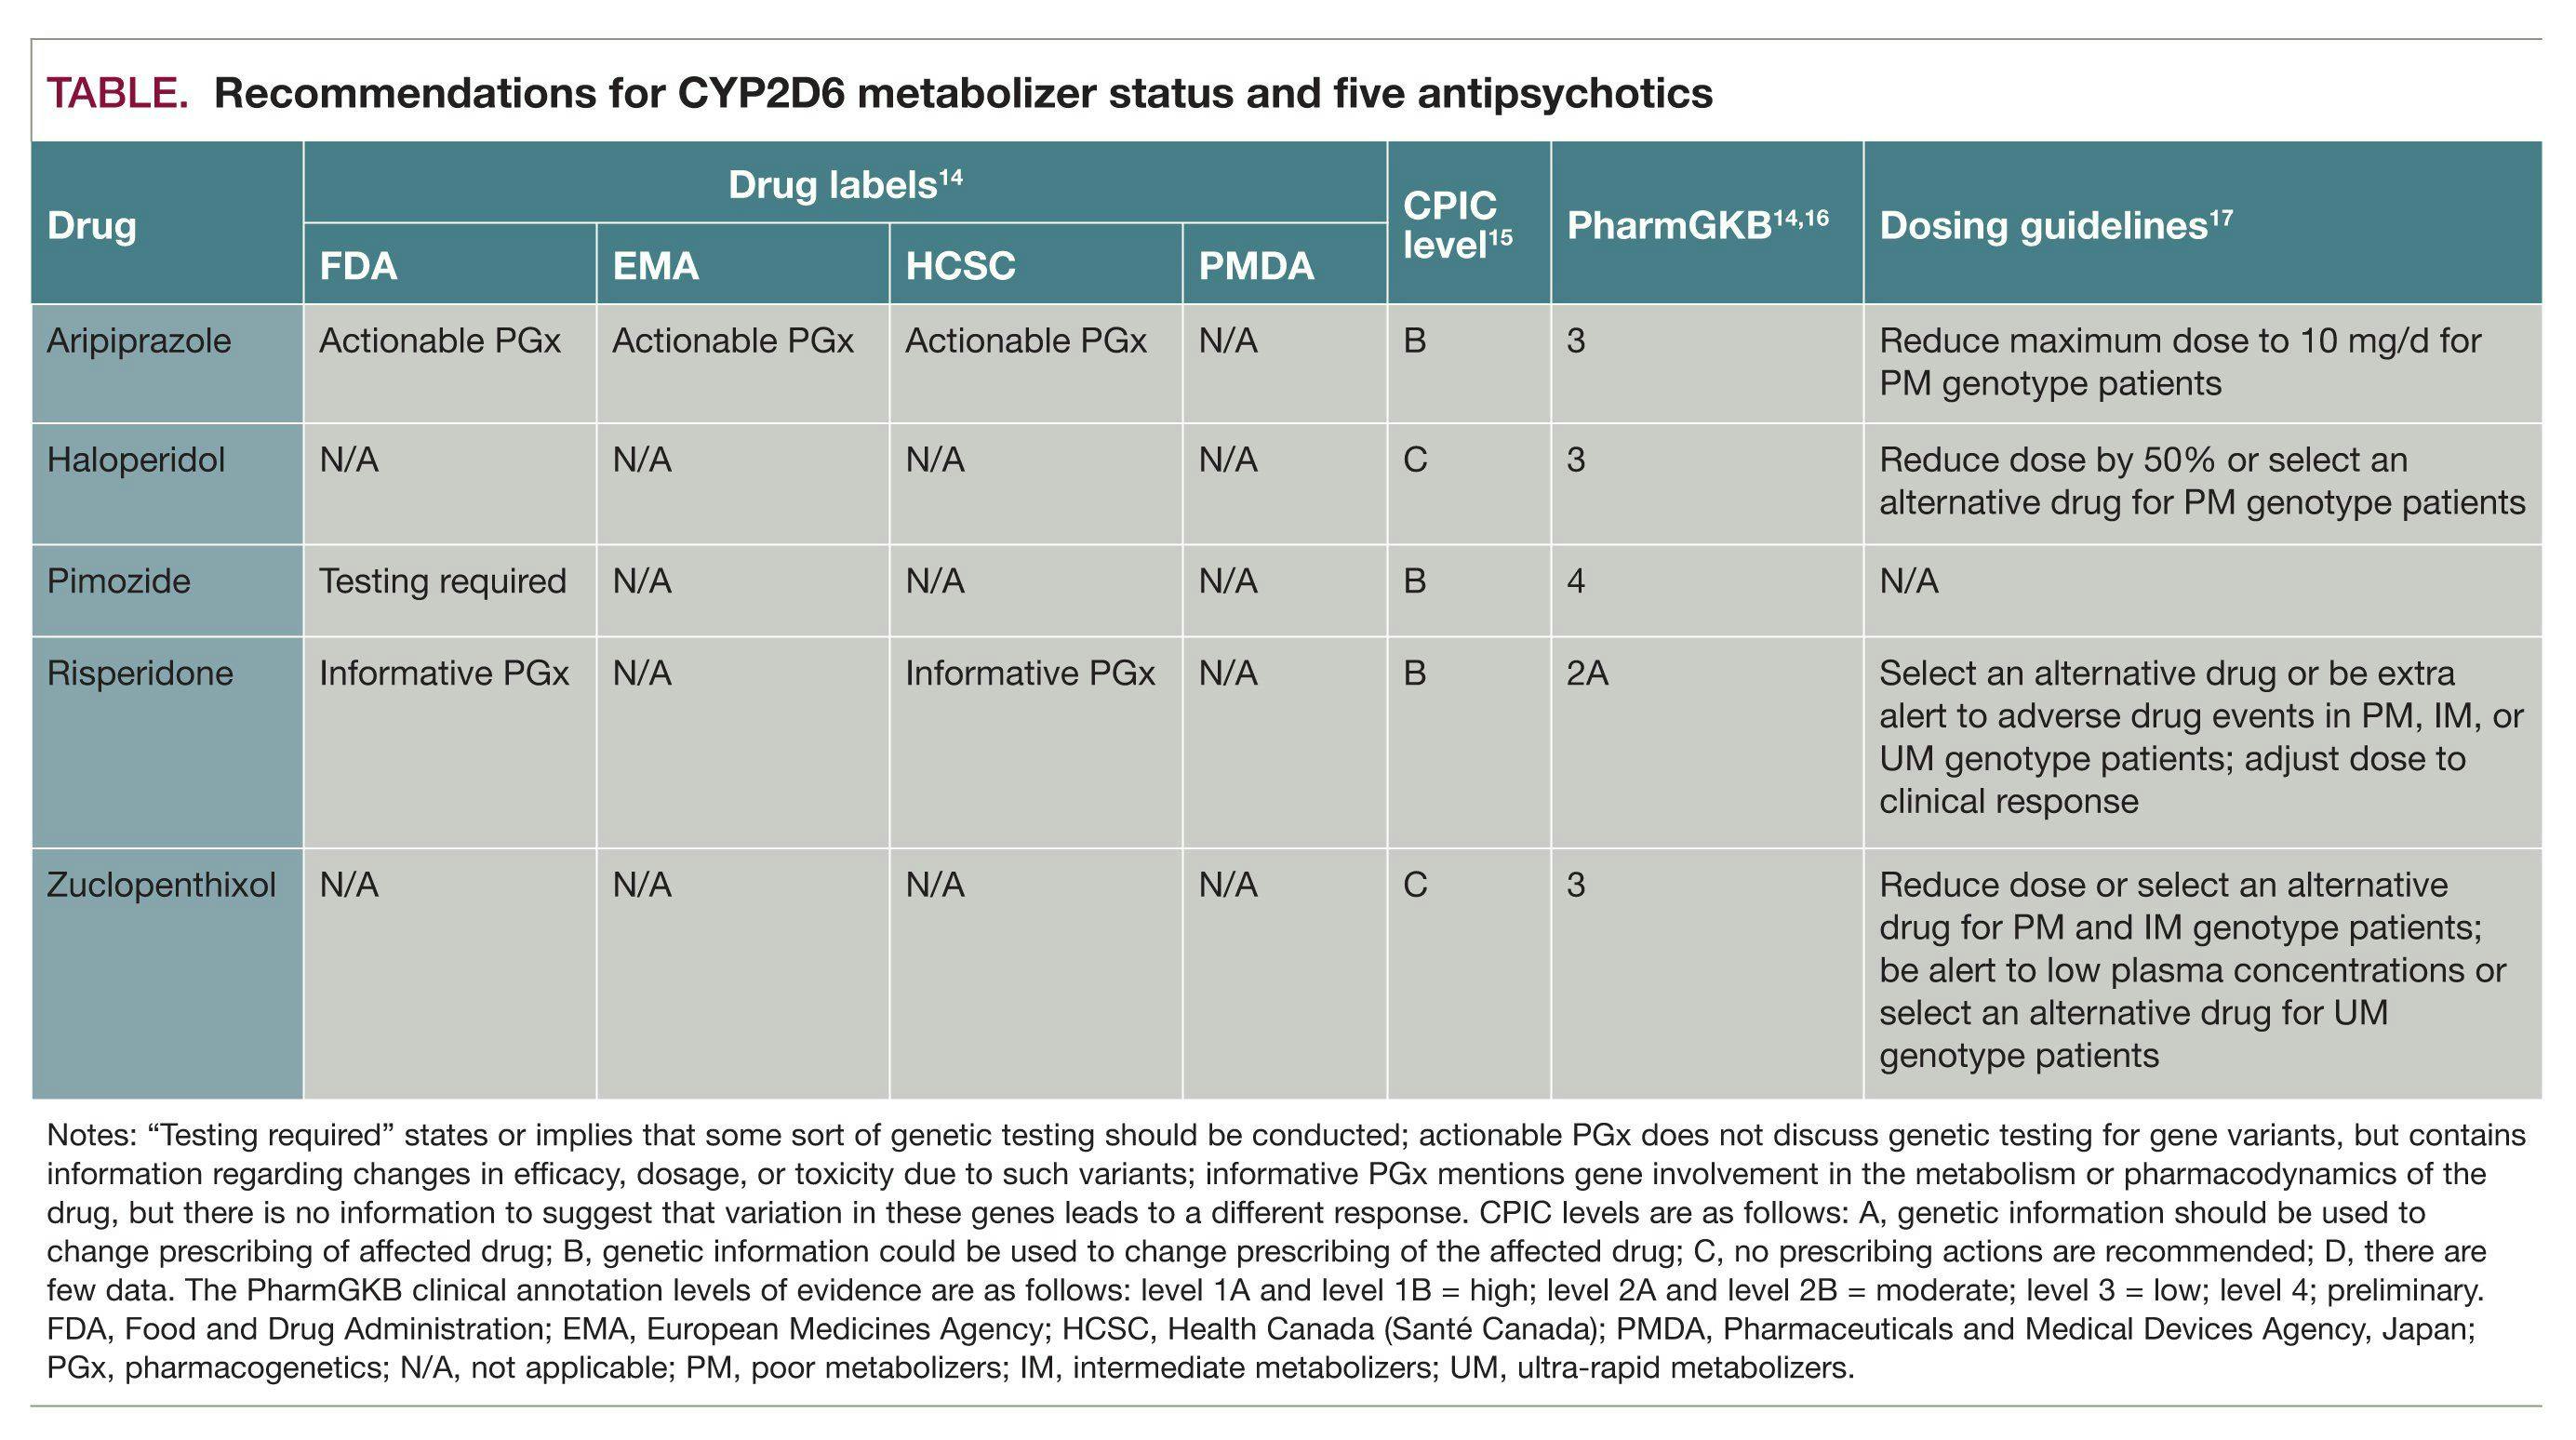 Recommendations for CYP2D6 metabolizer status and five antipsychotics 